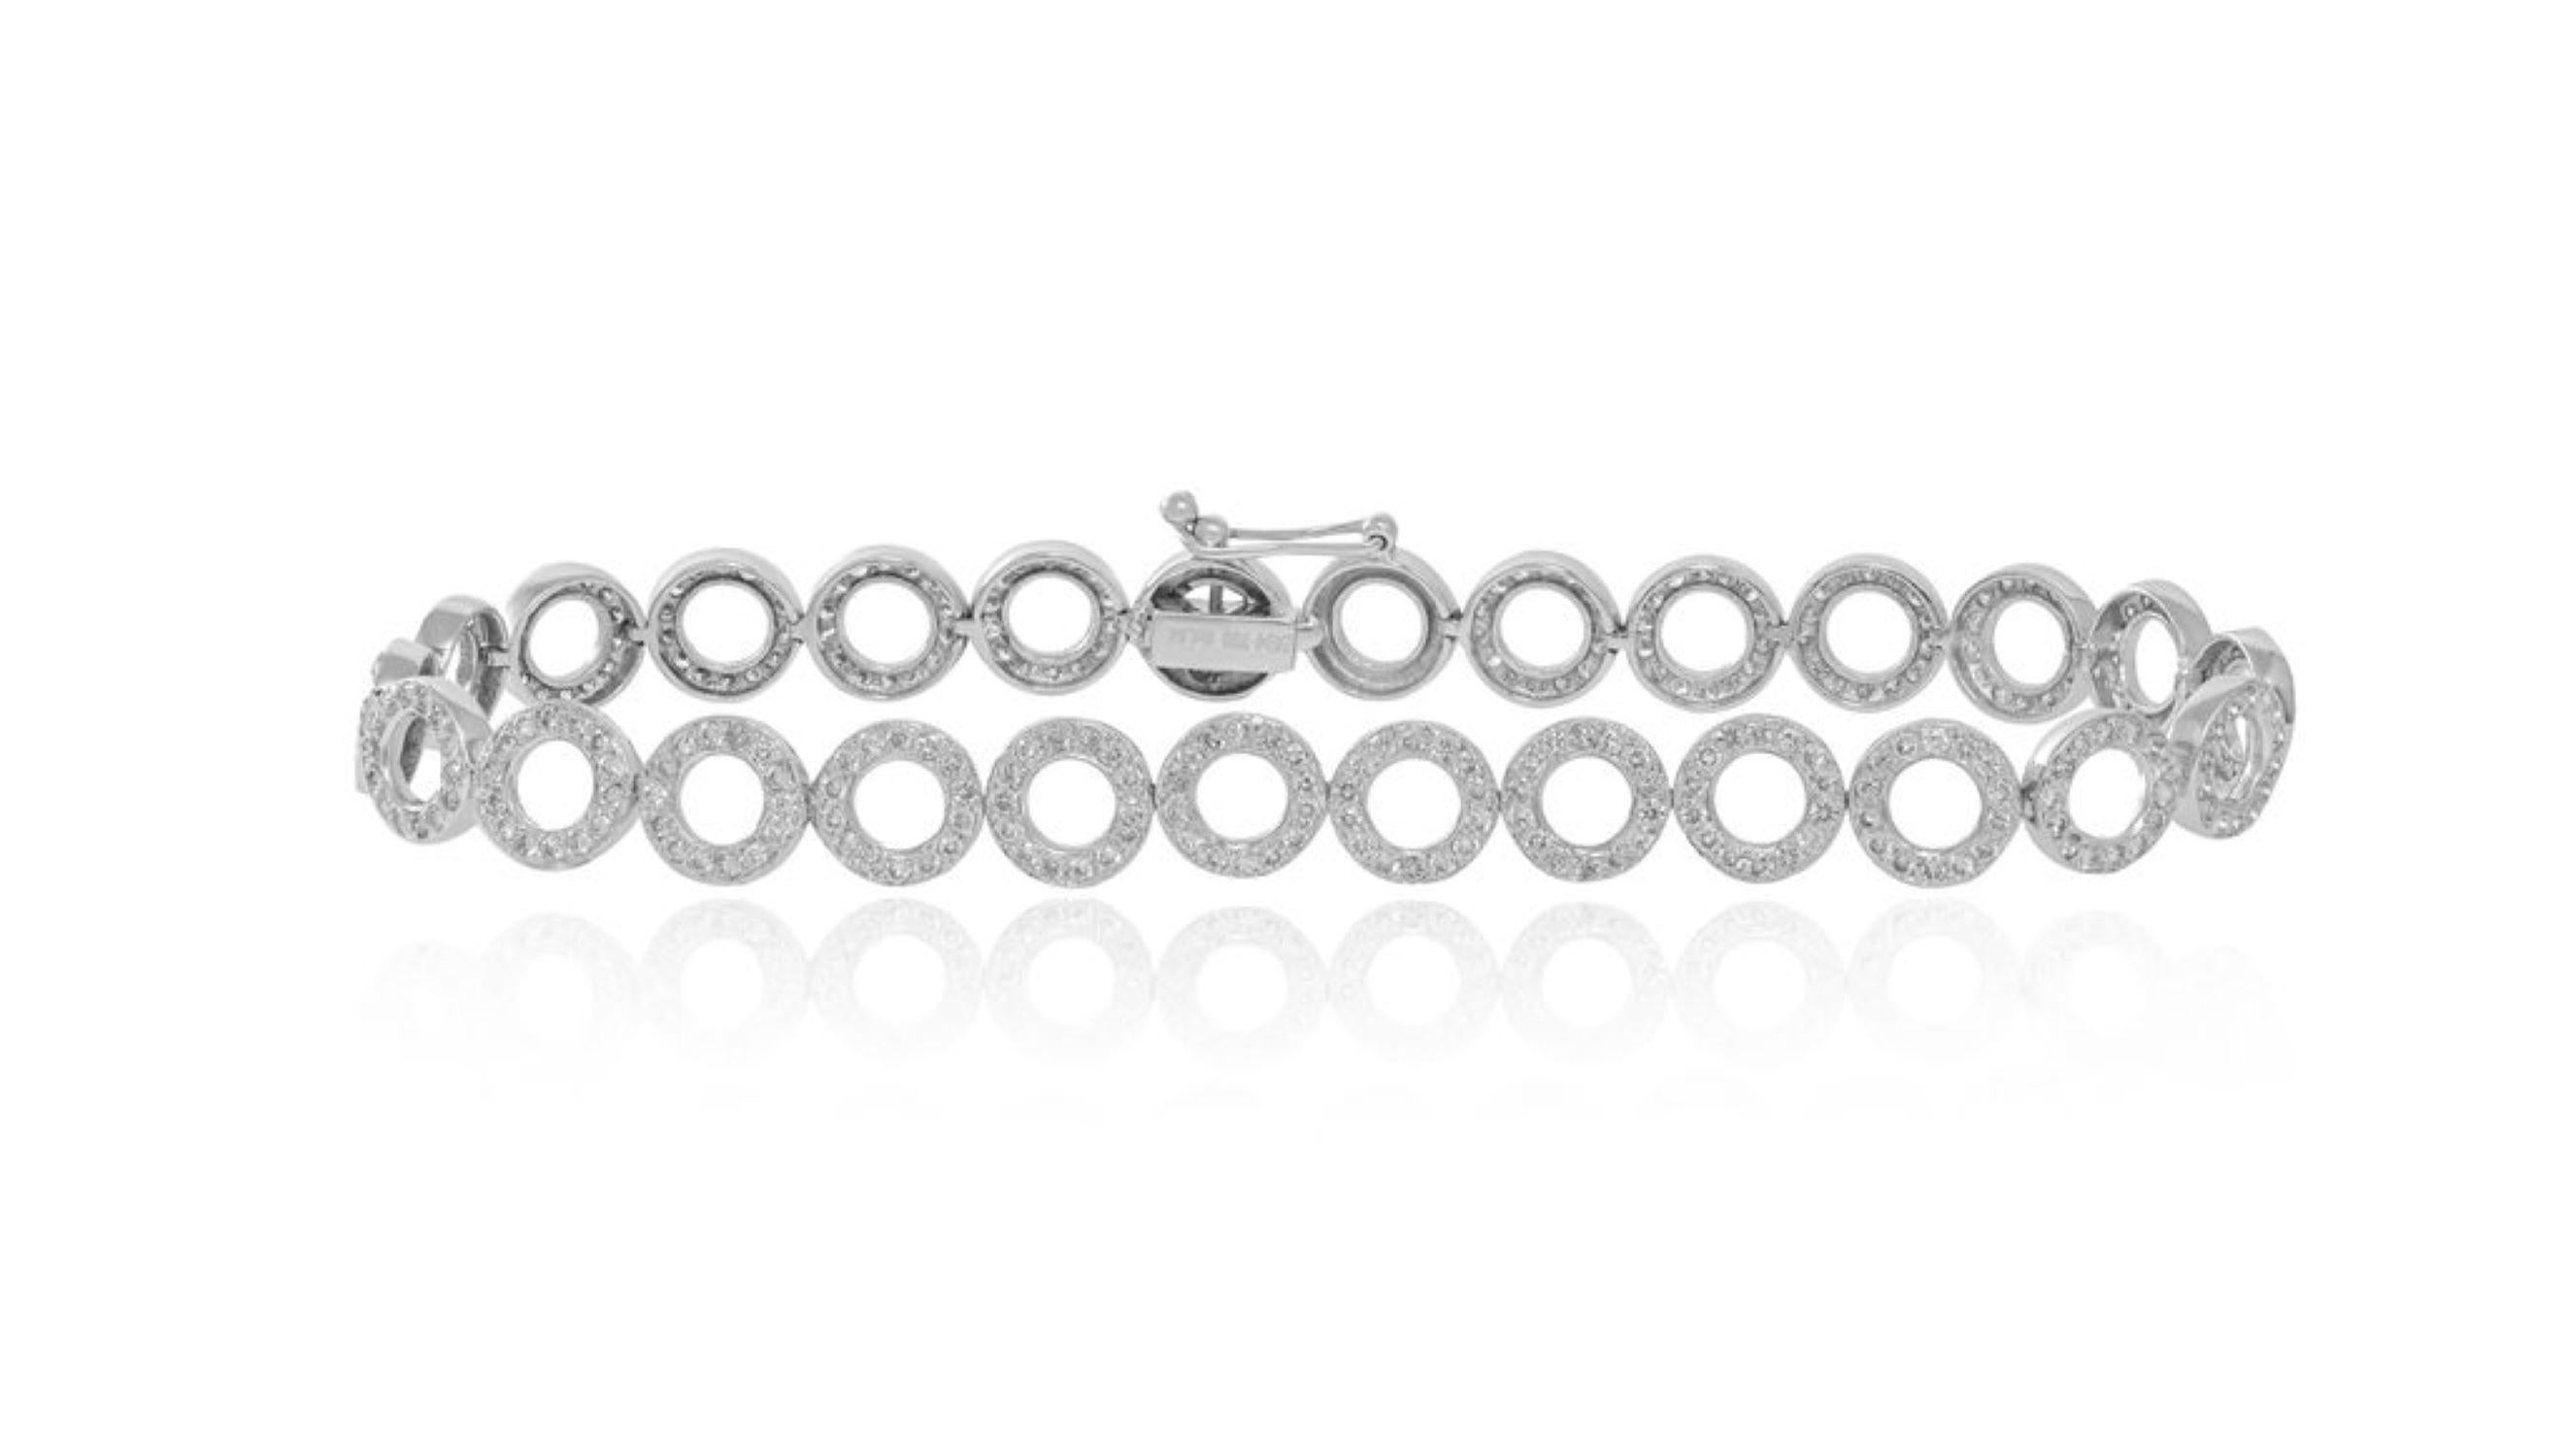 18kt white gold circle bracelet containing 1.94 cts of round diamonds